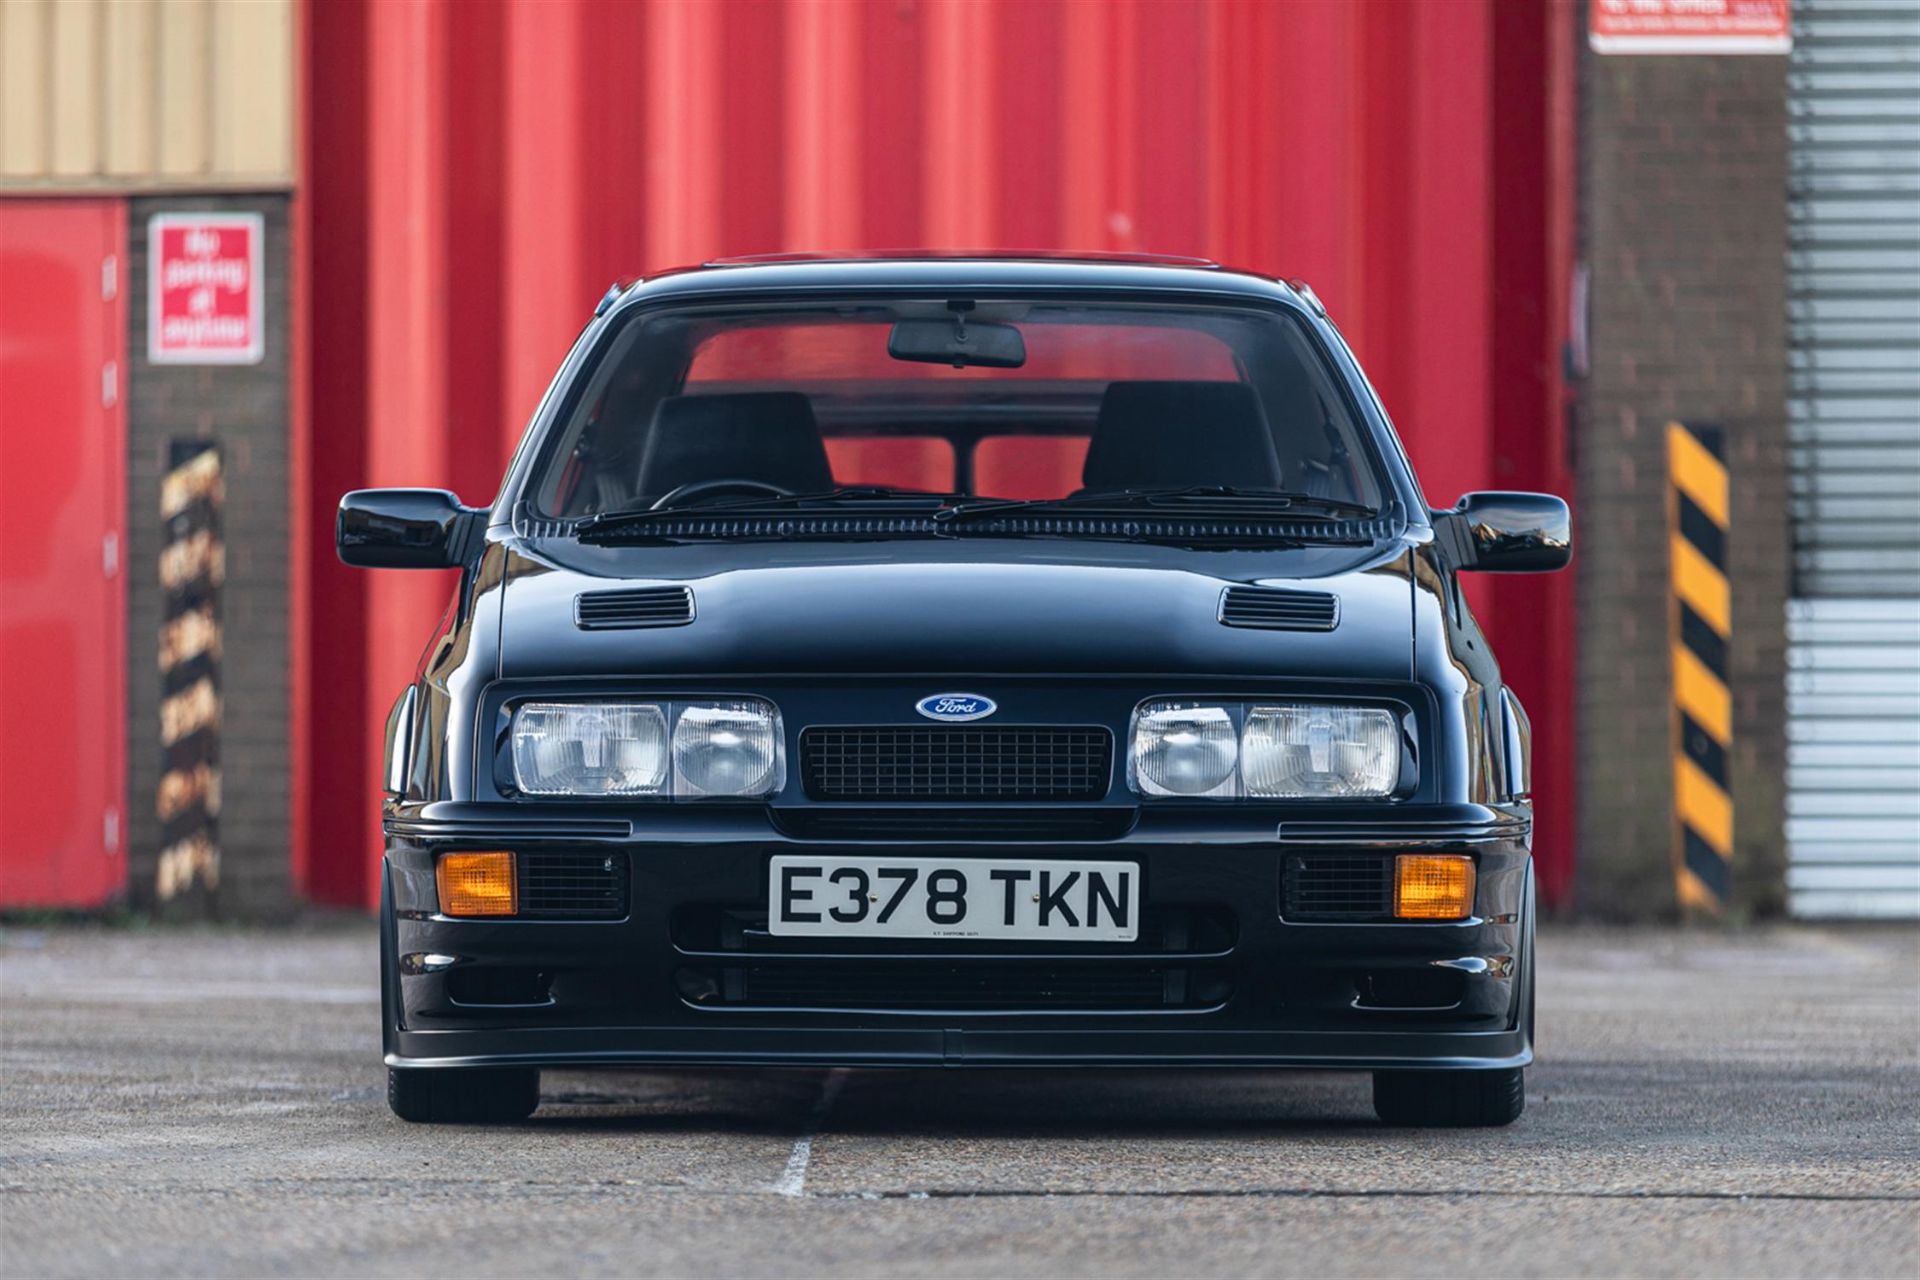 1987 Ford Sierra Cosworth RS500 - Image 8 of 10